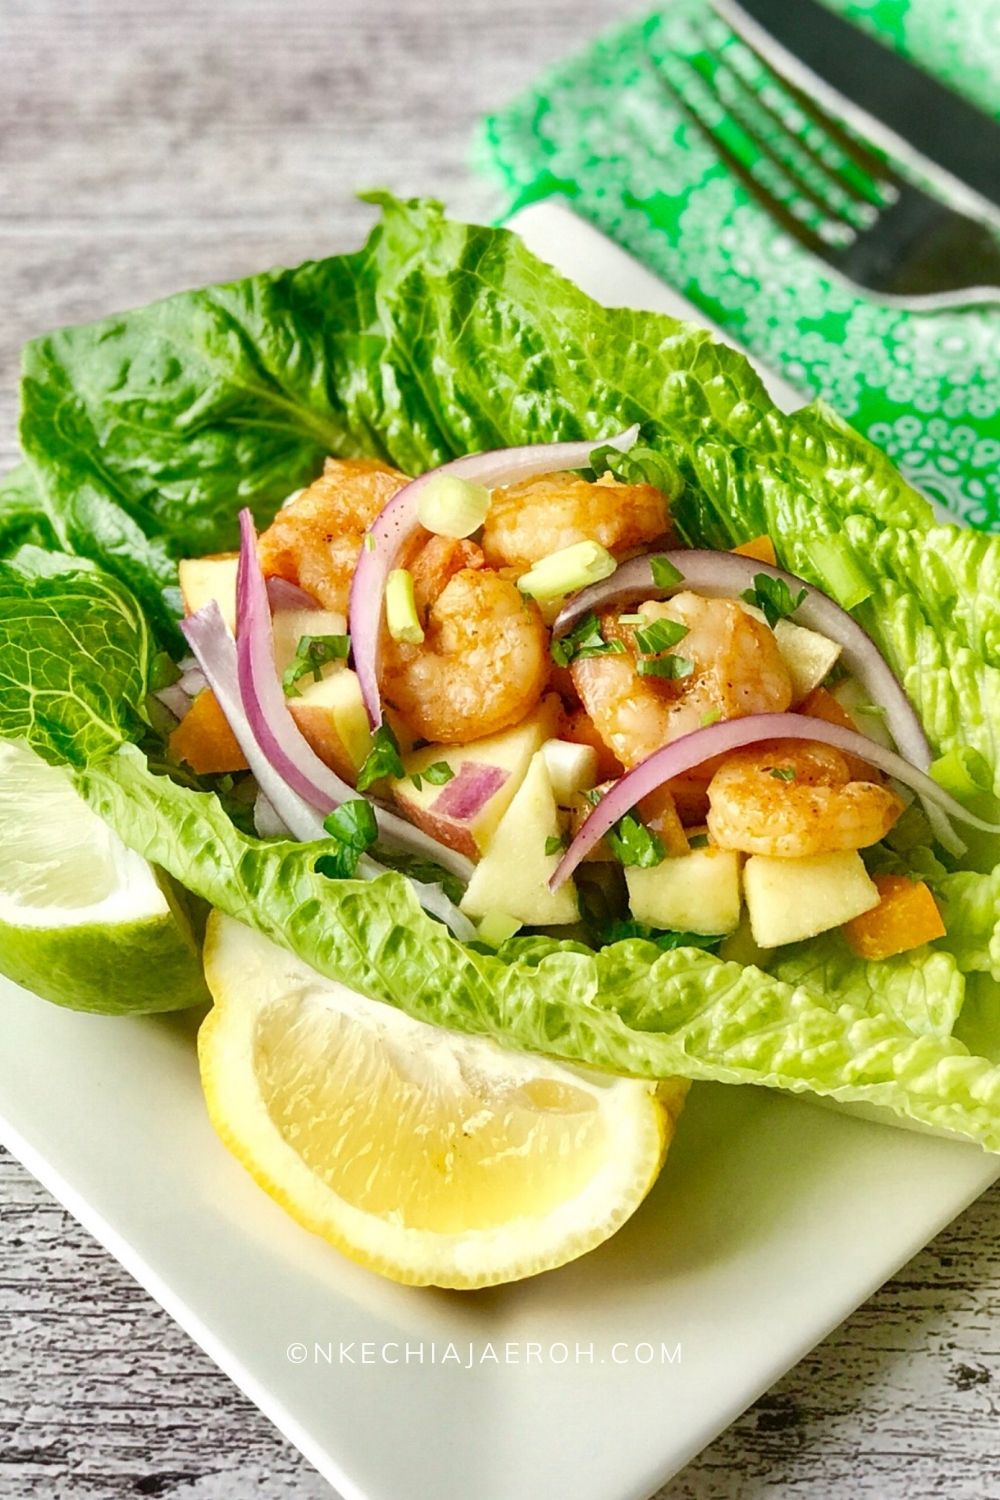 Healthy Spicy Shrimp Lettuce Wrap is low-carb, gluten-free, paleo-friendly, vegetarian, and super easy to make! This is an excellent alternative to regular taco, especially for light and clean eating. This 20-minute easy weekday lunch or dinner recipe is grain-free and served with healthy fuji apple salsa. You can substitute shrimp with tofu, or chicken; enjoy this healthy lettuce wrap recipe your way! #healthyrecipe #lettucewrap #apples #applerecipe #healthyshrimptaco #summertime #partyfood